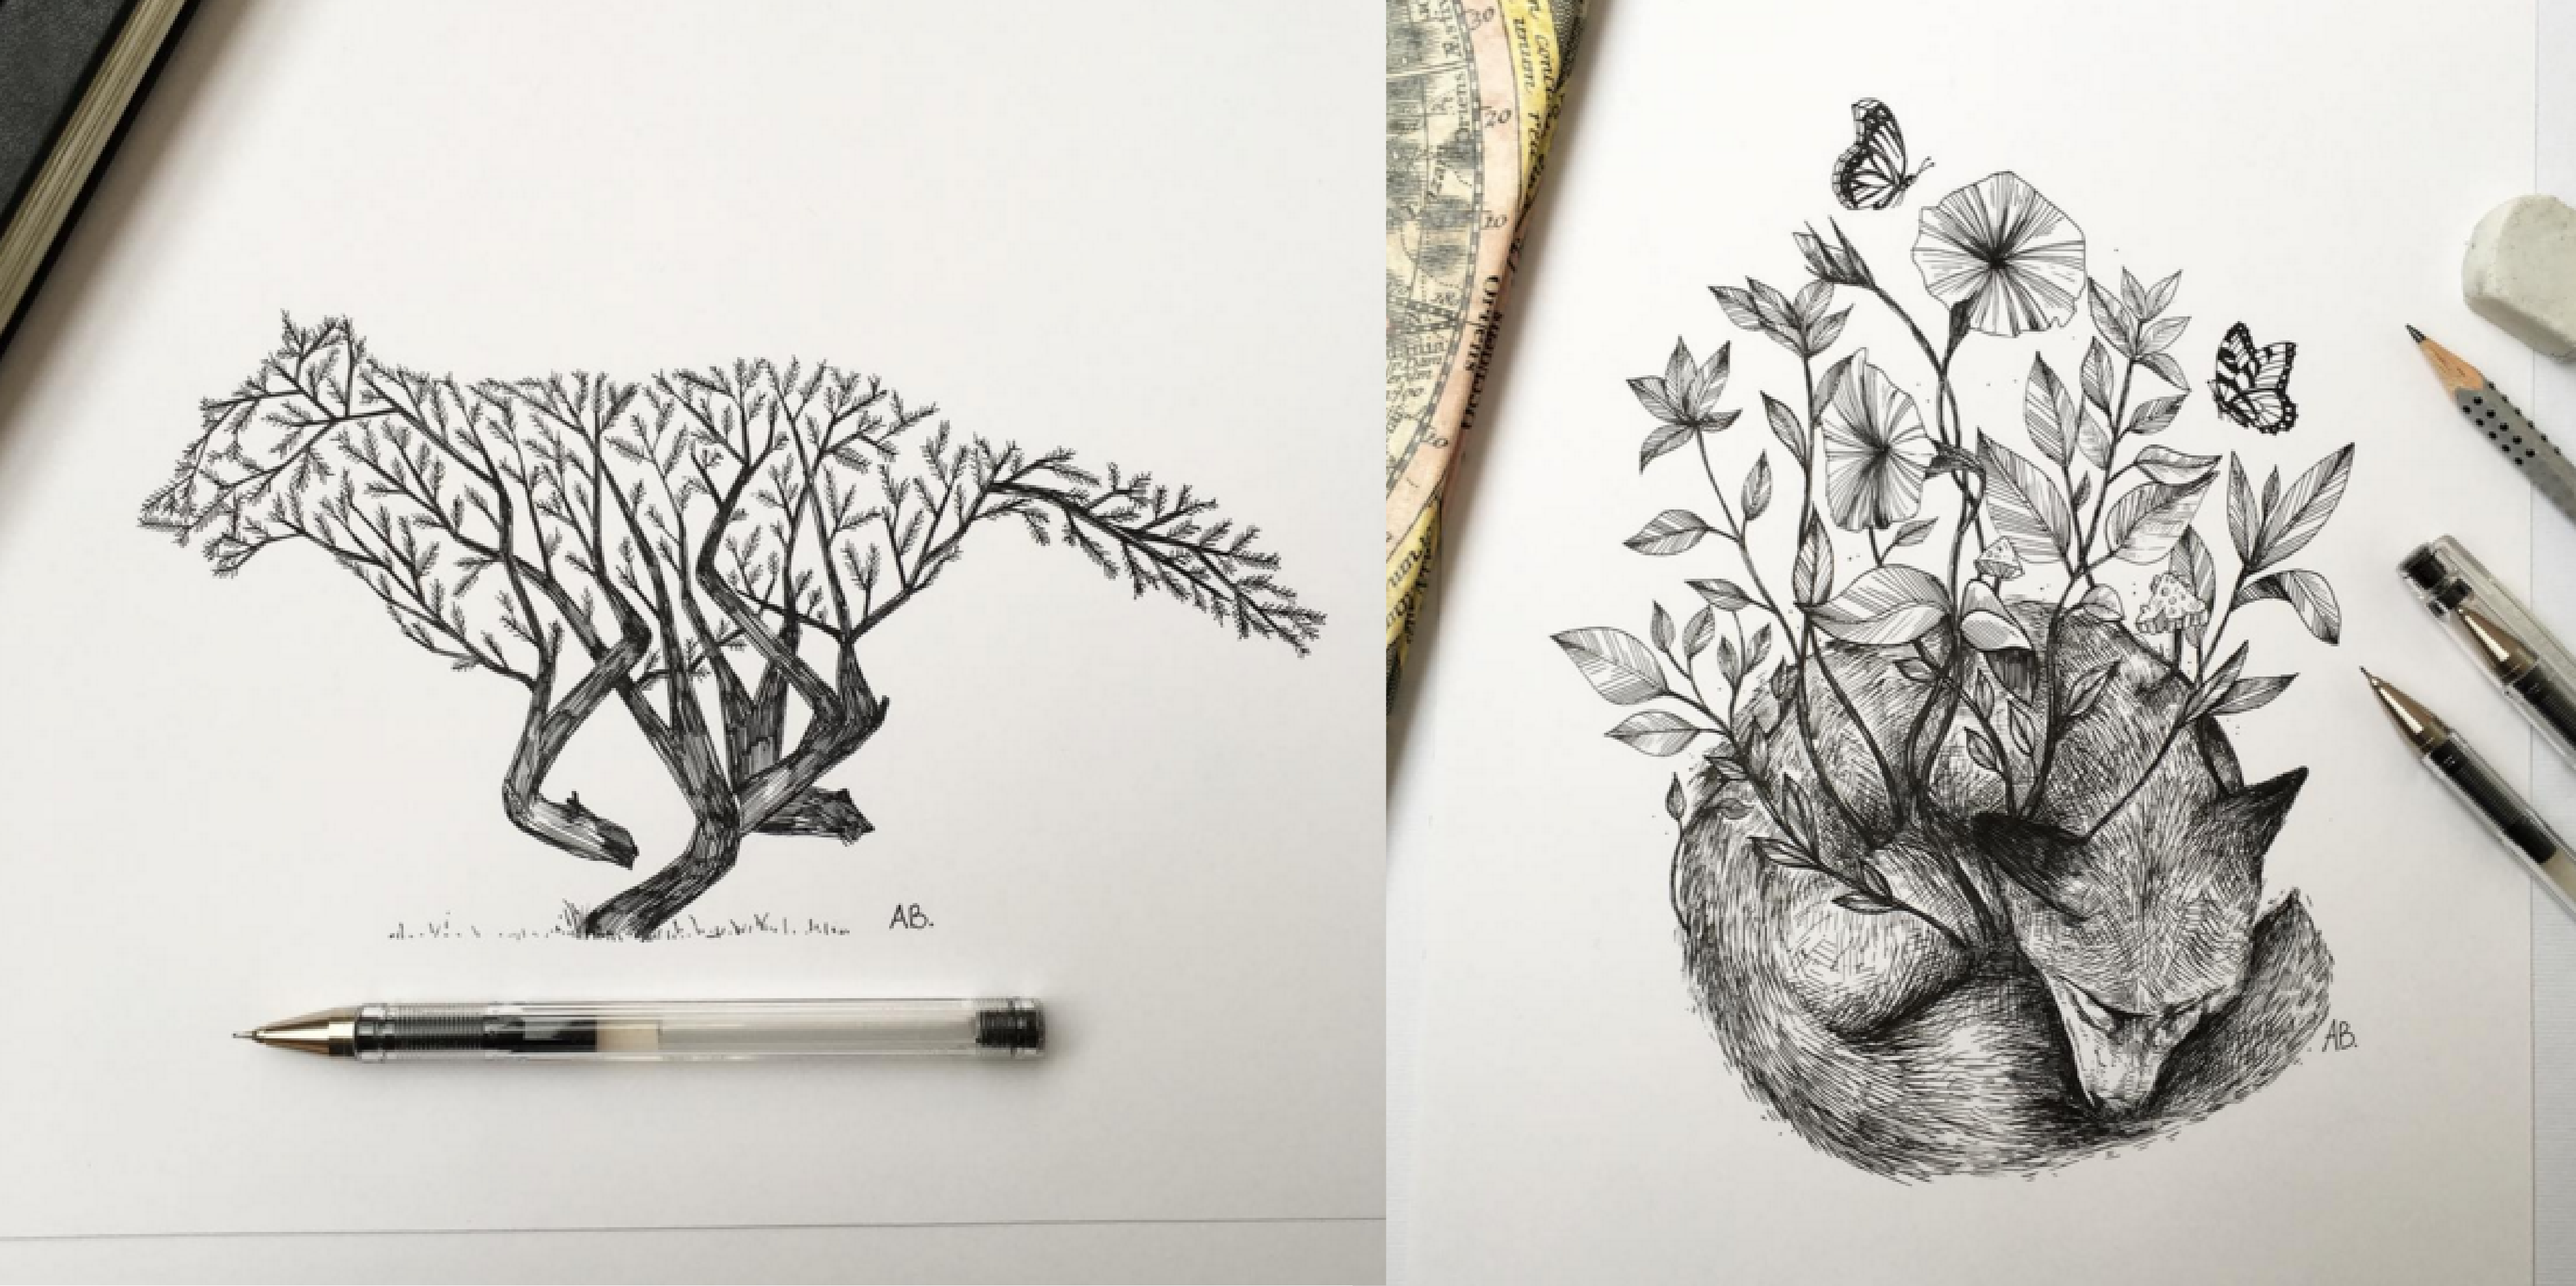 Awesome Sketches Pen Drawings by Alfred Basha 99inspiration